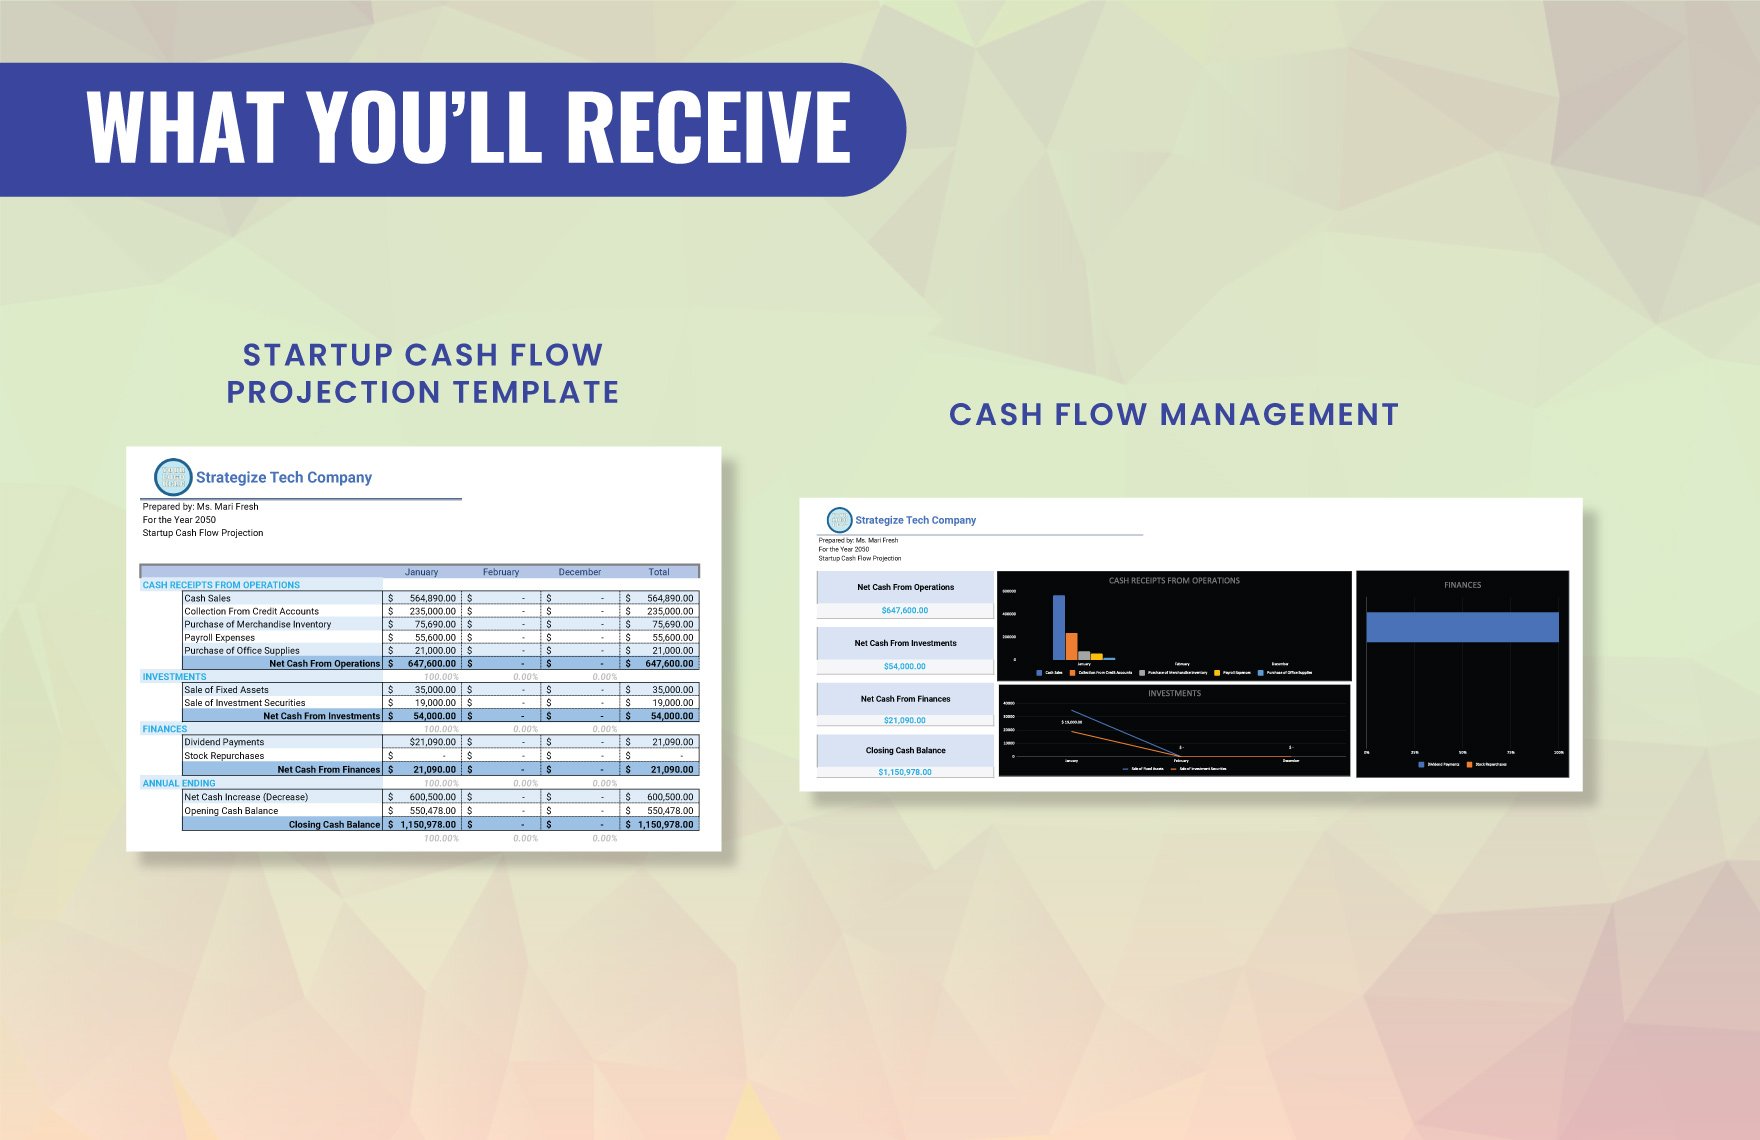 Startup CashFlow Projection Template